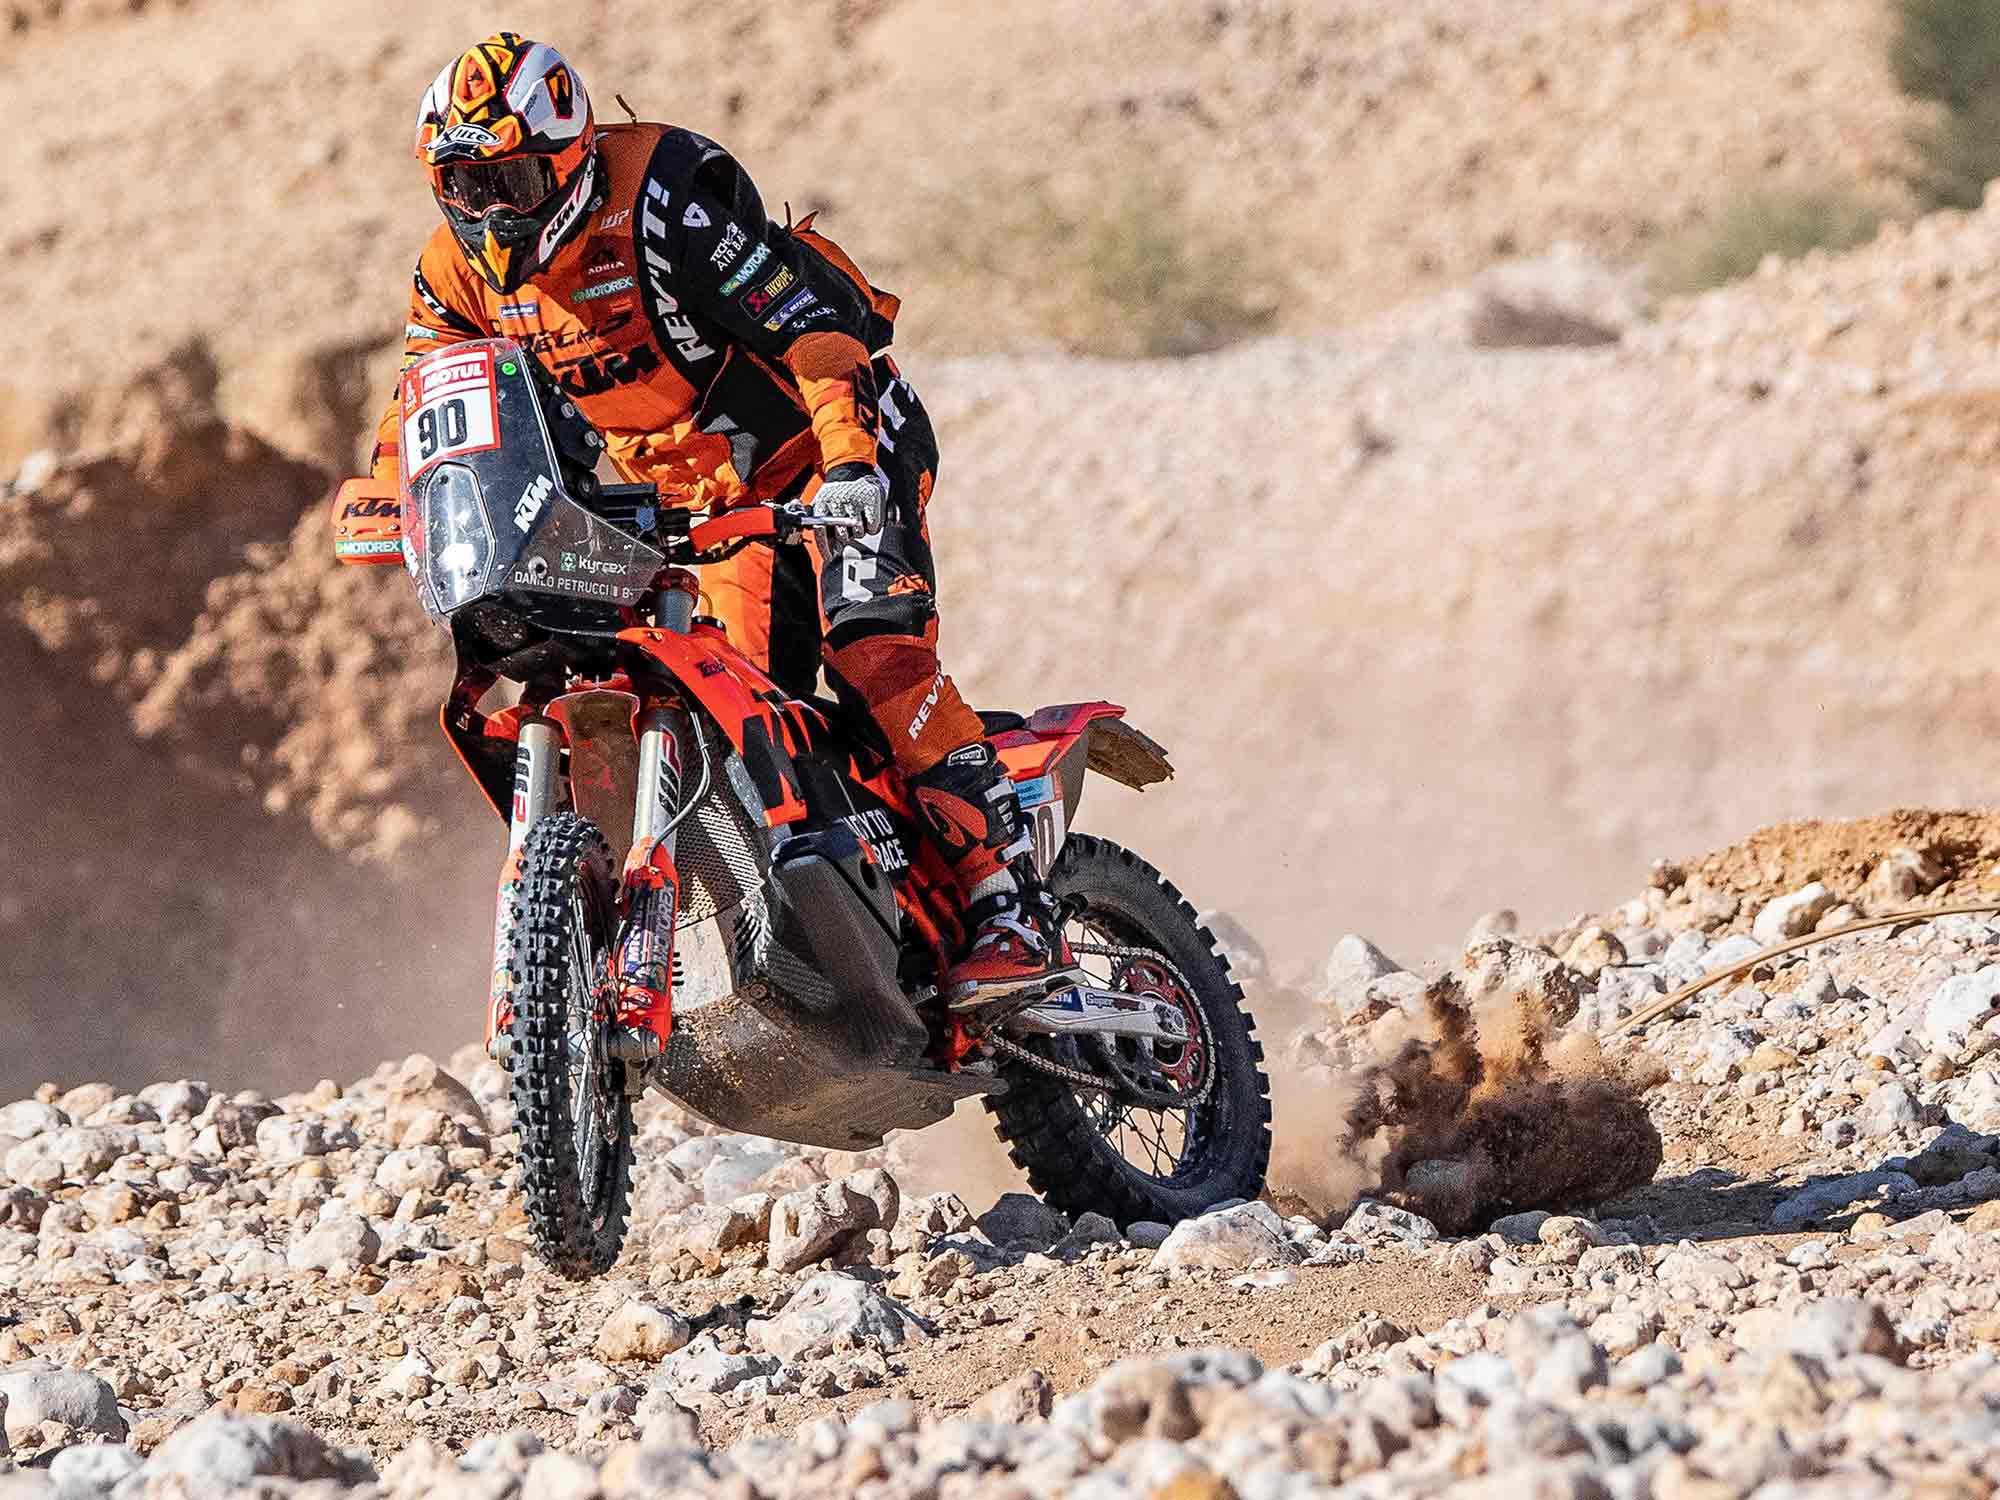 Dakar is one of the toughest races in the world, but Petrucci enjoyed the challenge.